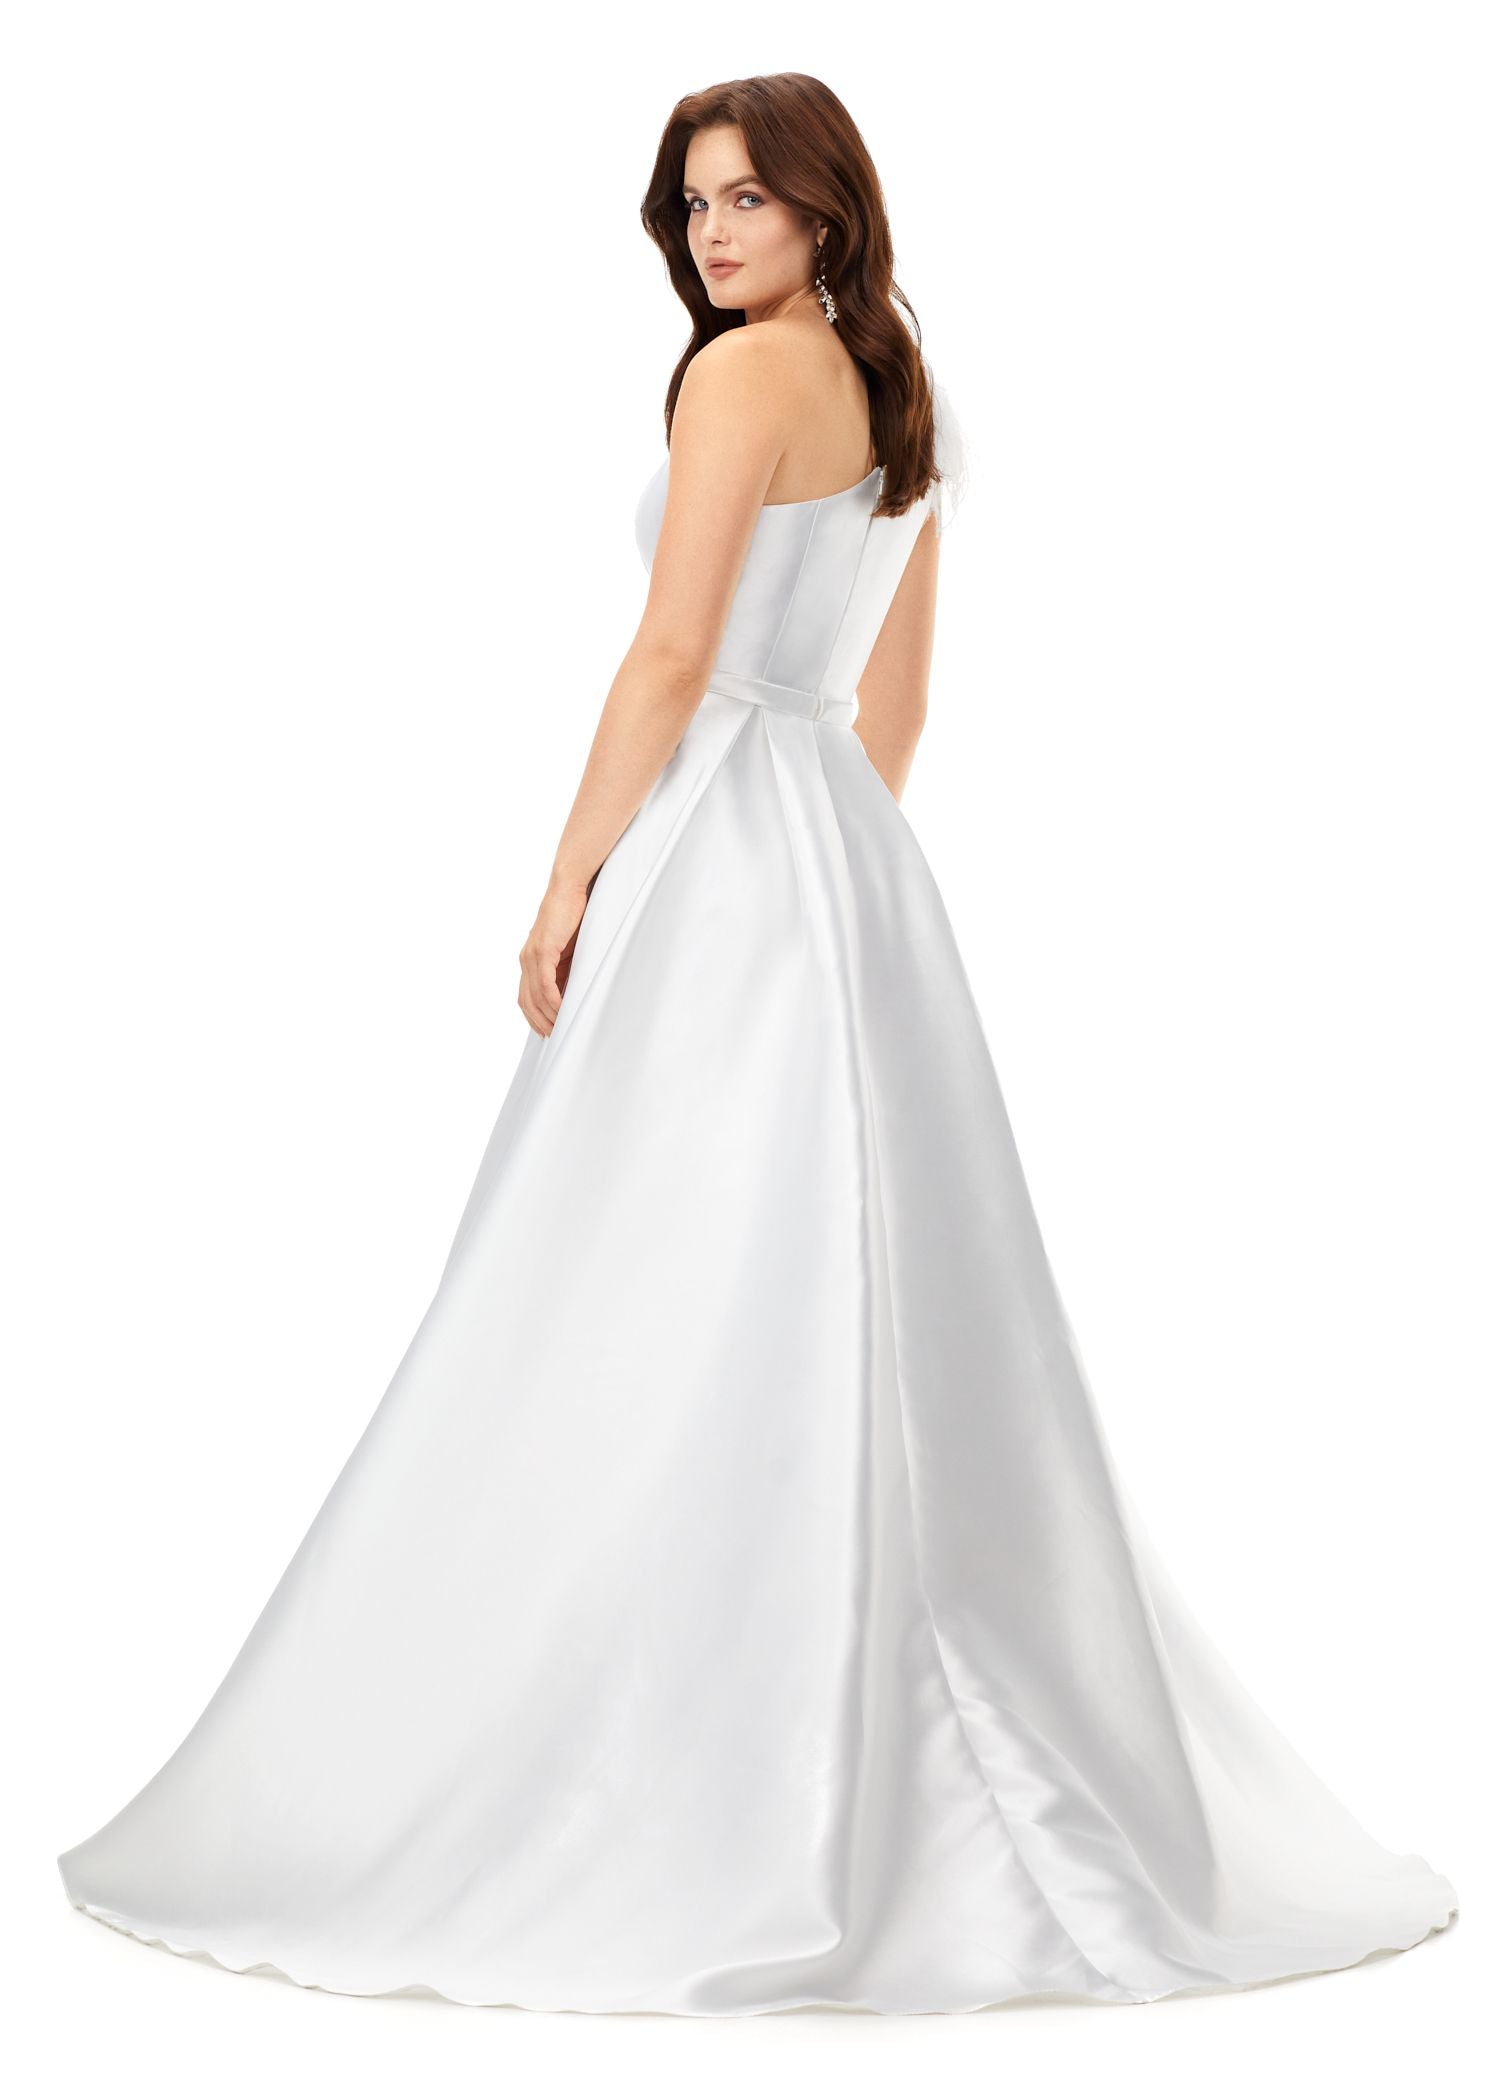 Ashley Lauren 11336 This elegant and sophiscated one shoulder ball gown is sure to make a statement at your next event. The neckline is emebellished with feather details. The a-line skirt completes the look. One Shoulder A-Line Skirt Feather Details Mikado COLORS: Turquoise, Ivory, Red